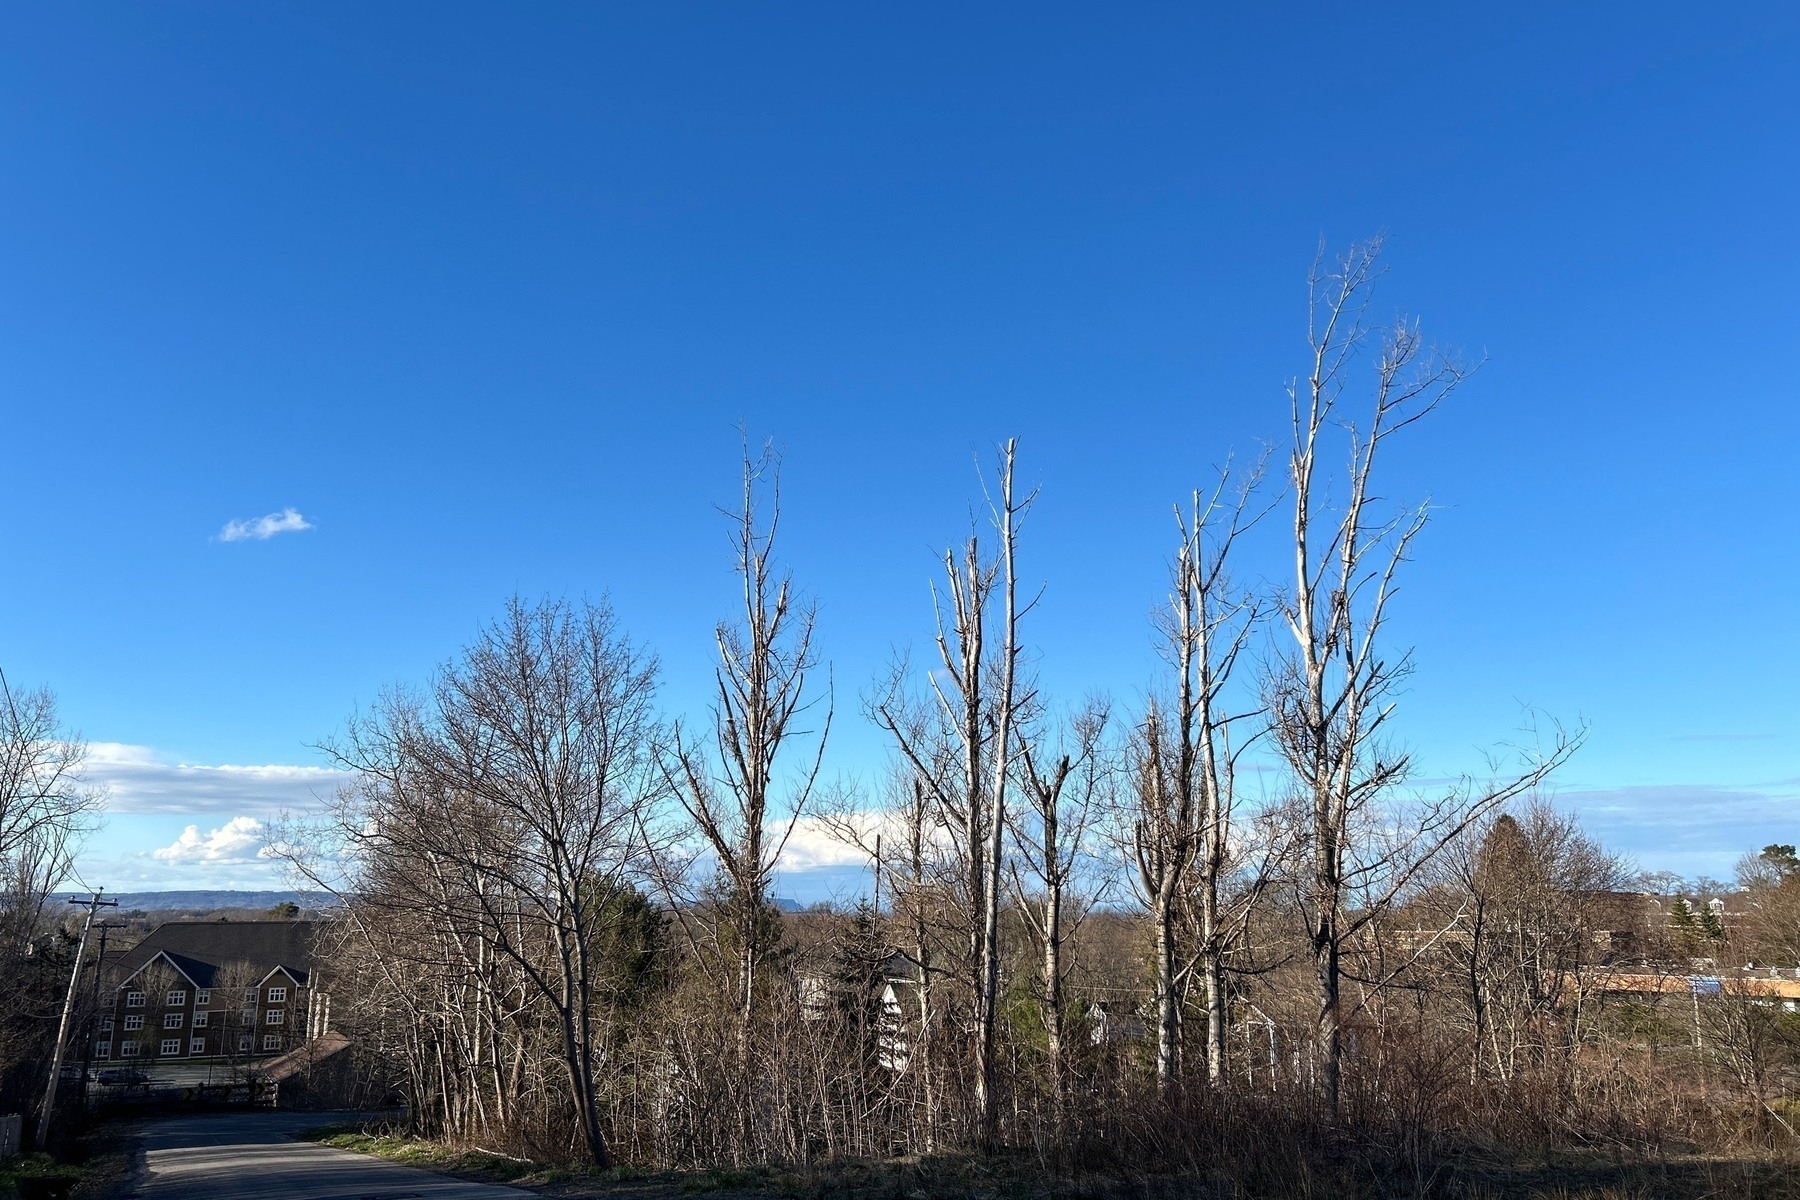 Blue sky with trees in the foreground.